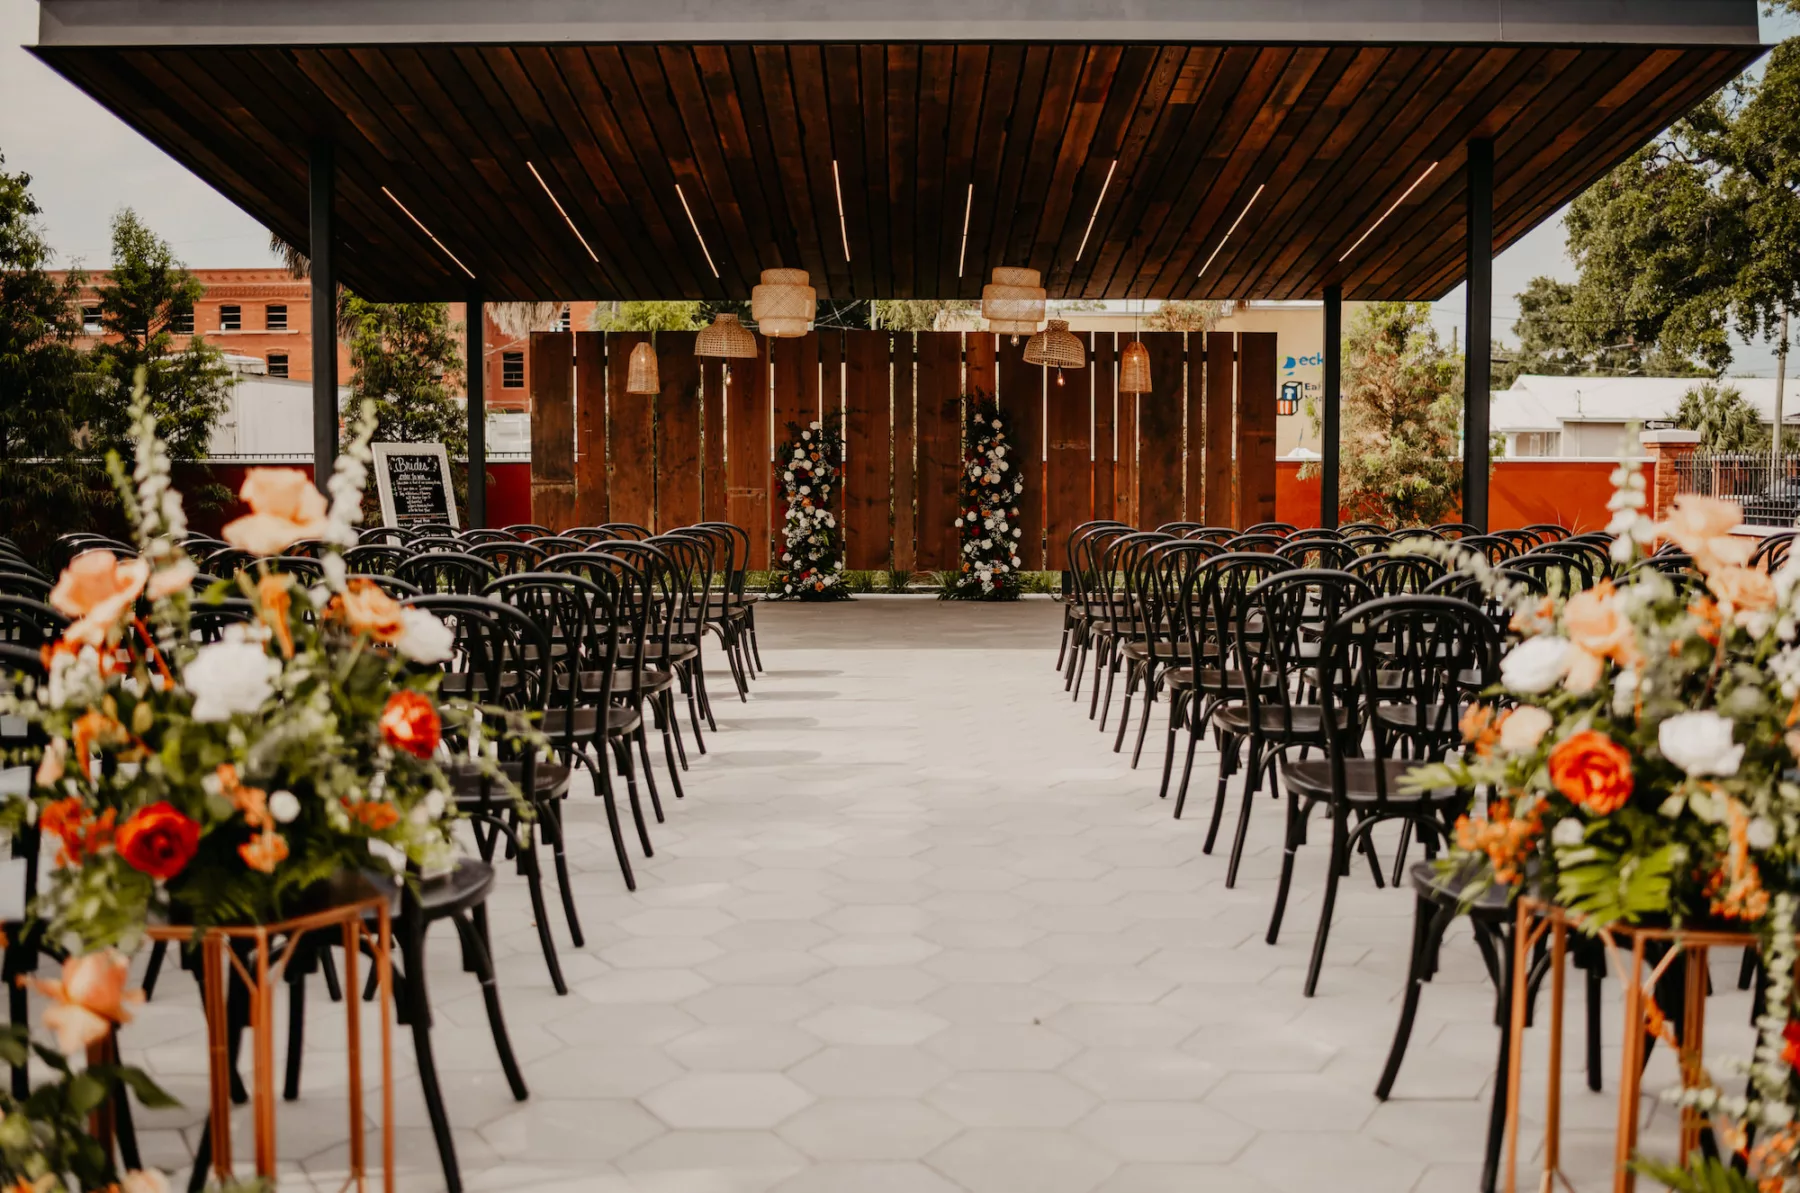 Outdoor Boho Industrial Terracotta and Black Wedding Ceremony Decor Inspiration | Tampa Bay Planner B Eventful | Outdoor Courtyard Venue J.C. Newman Cigar Co.